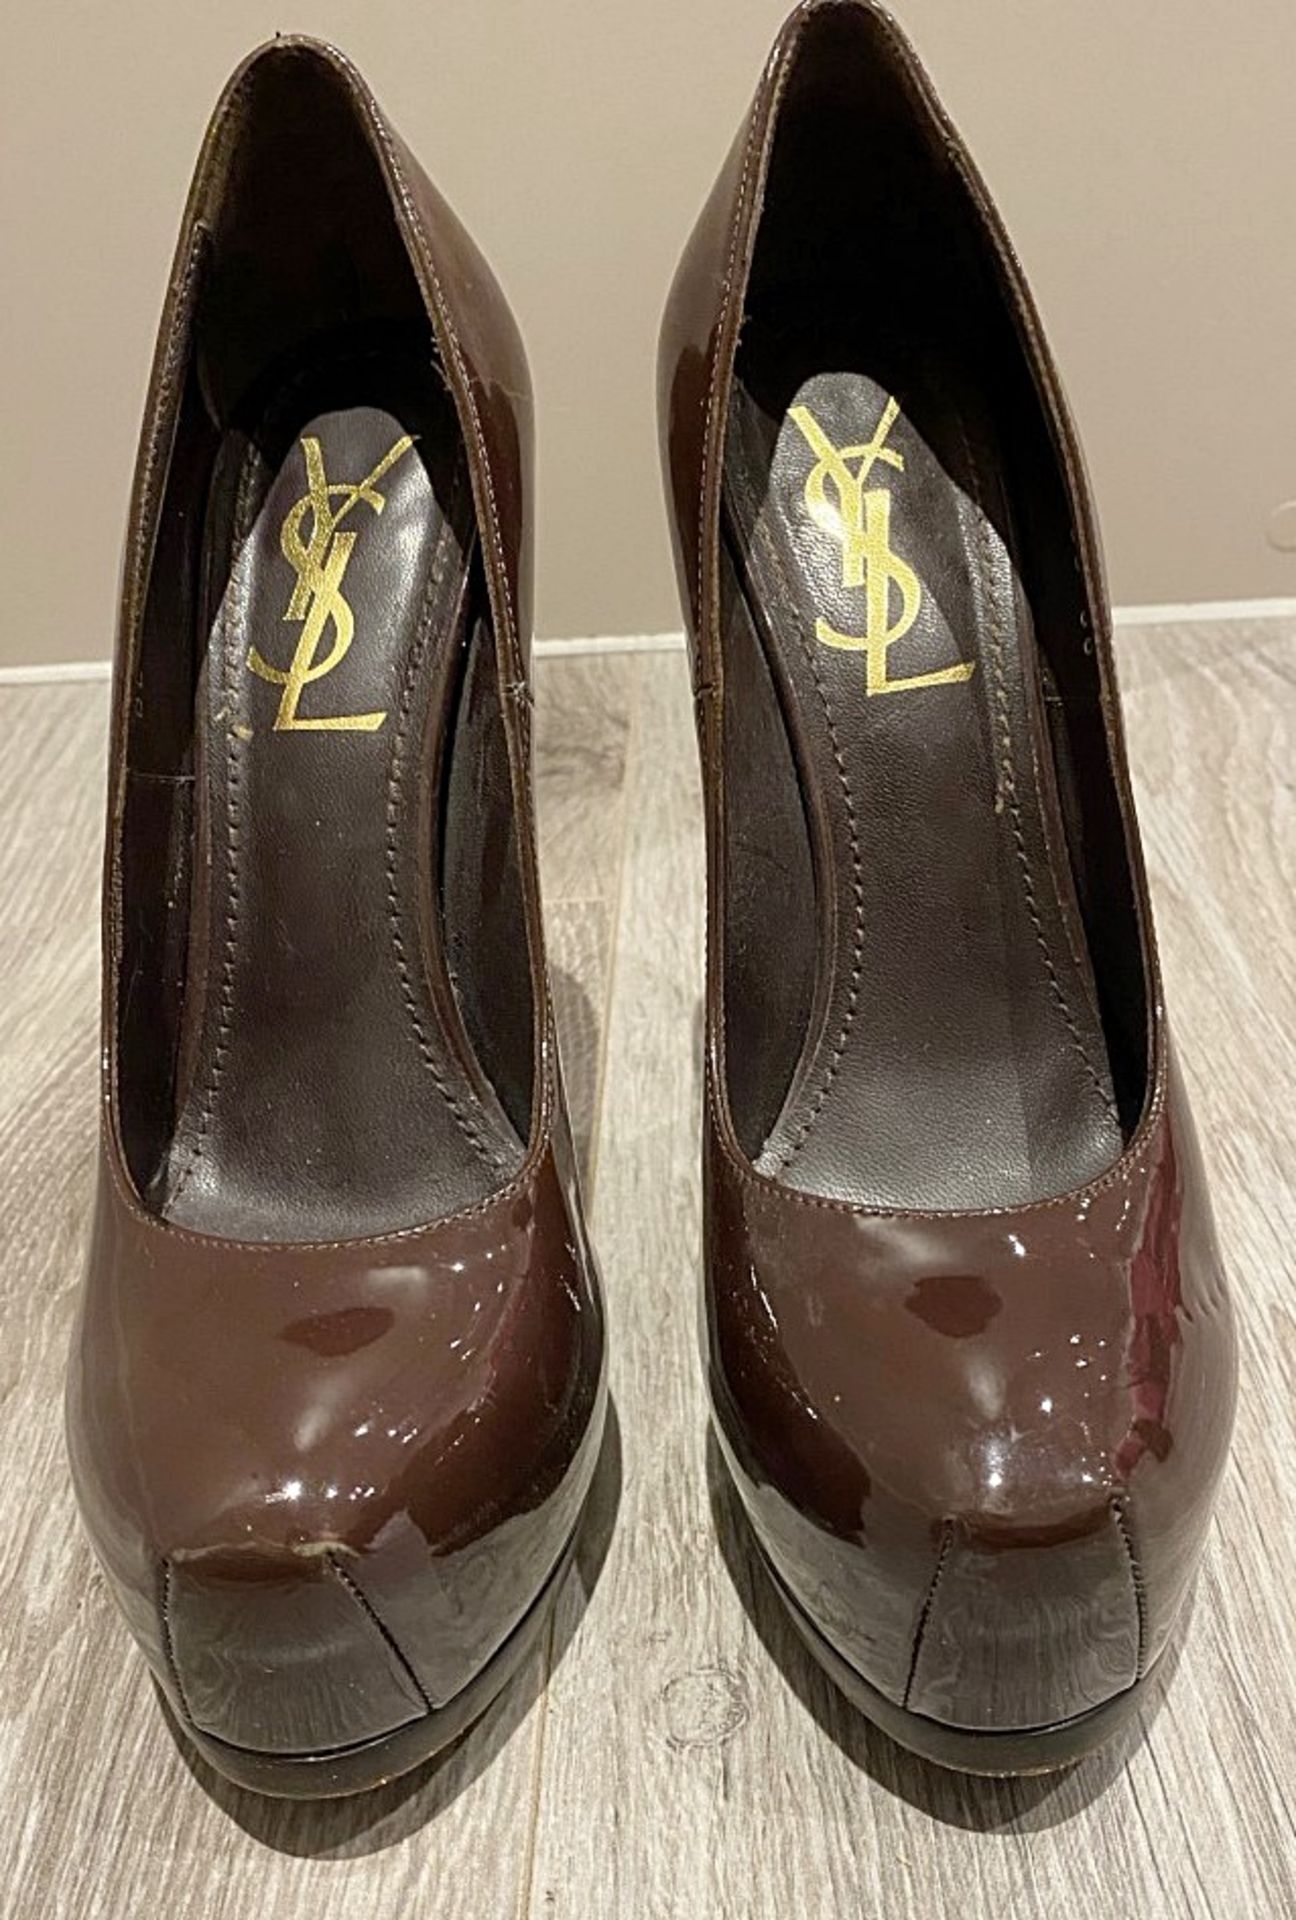 1 x Pair Of Genuine YSL High Heel Shoes In Brown - Size: 36 - Preowned in Good Condition - Ref: LOT4 - Image 4 of 4